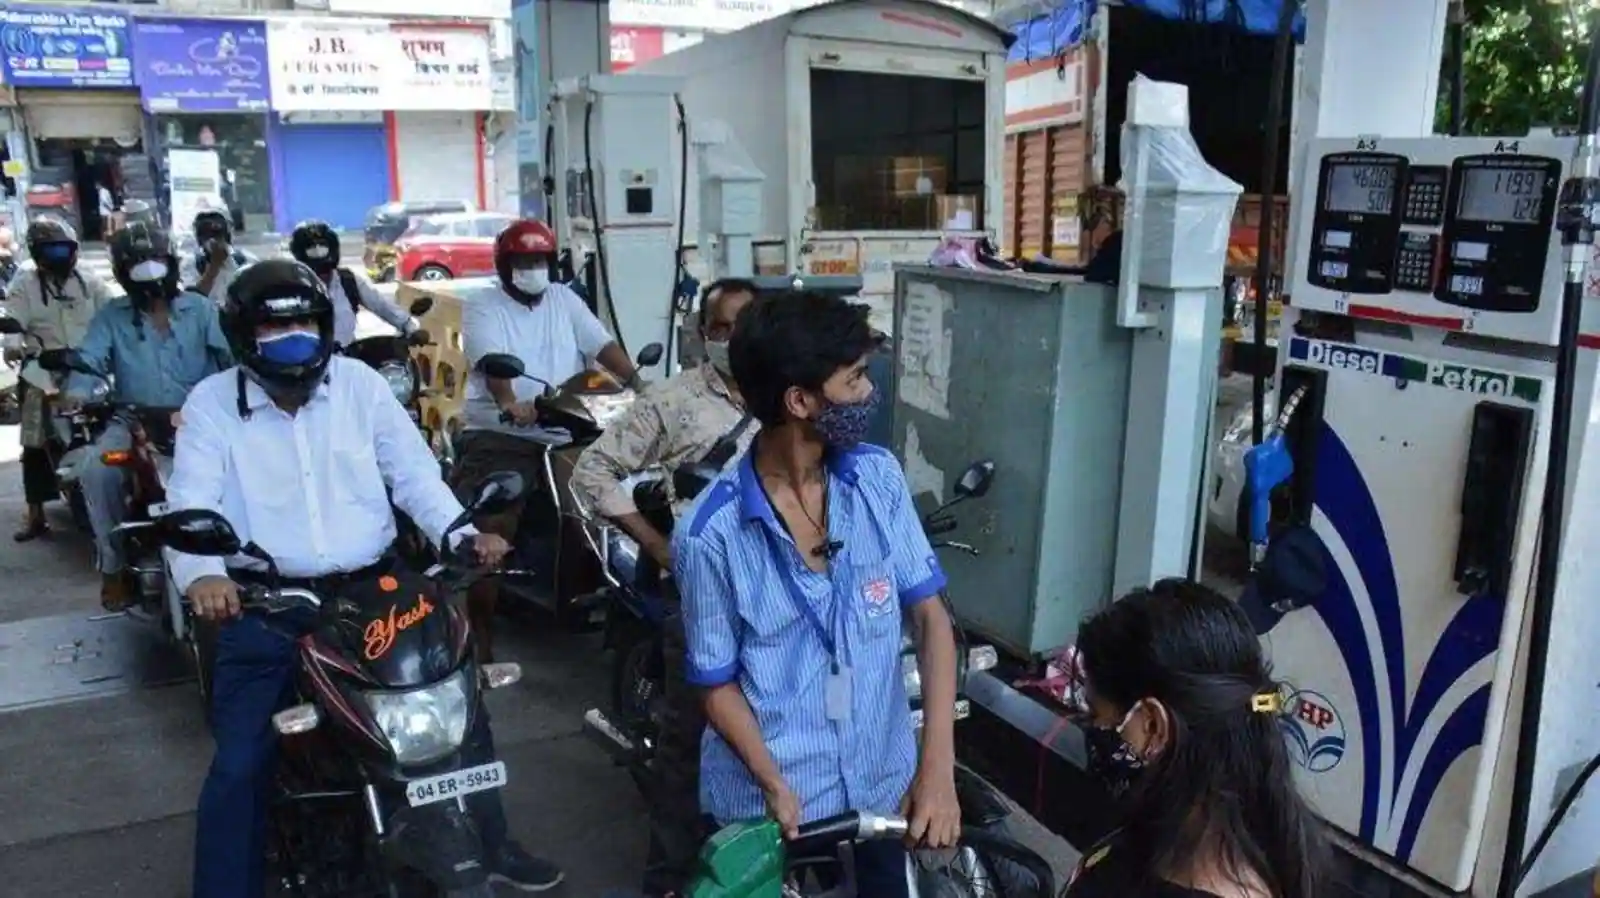 Petrol Diesel Price Today: Latest fuel rates released for different states, check here